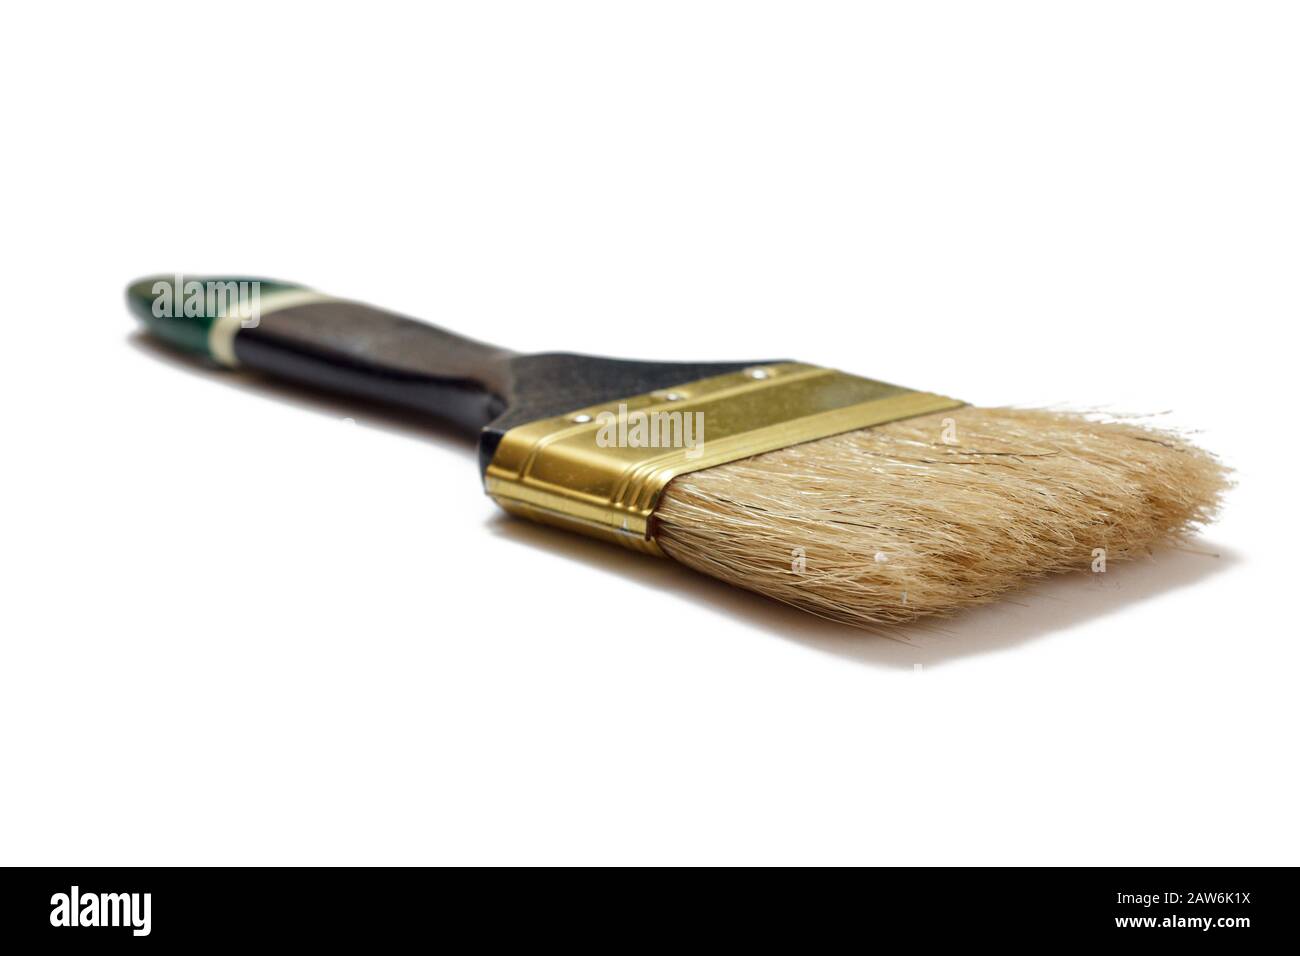 House painter brush on a white isolated background. Repair tool. Building tool. Close-up view. Stock Photo